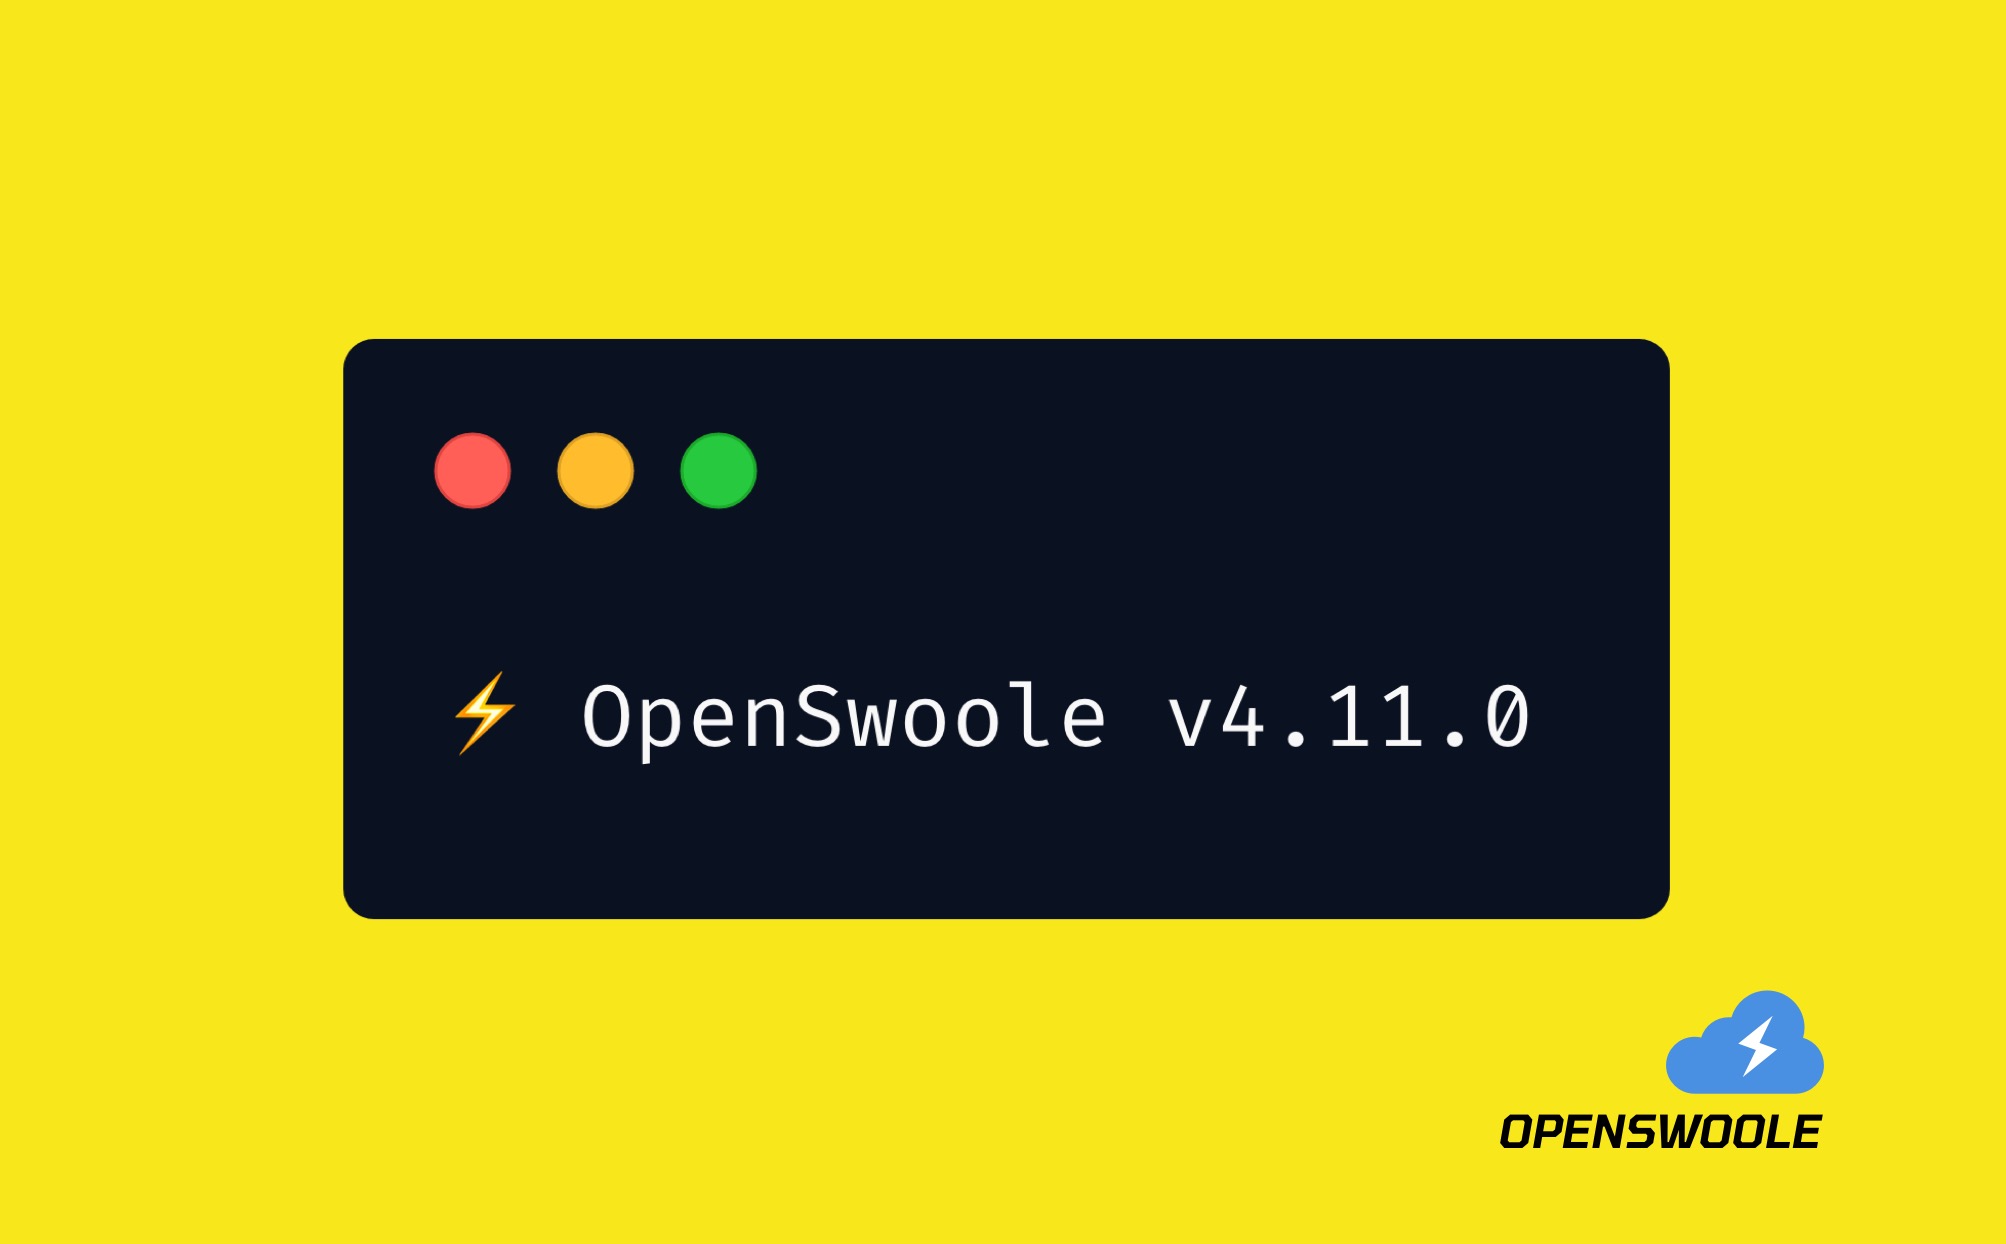 Official Open Swoole version 4.11.0